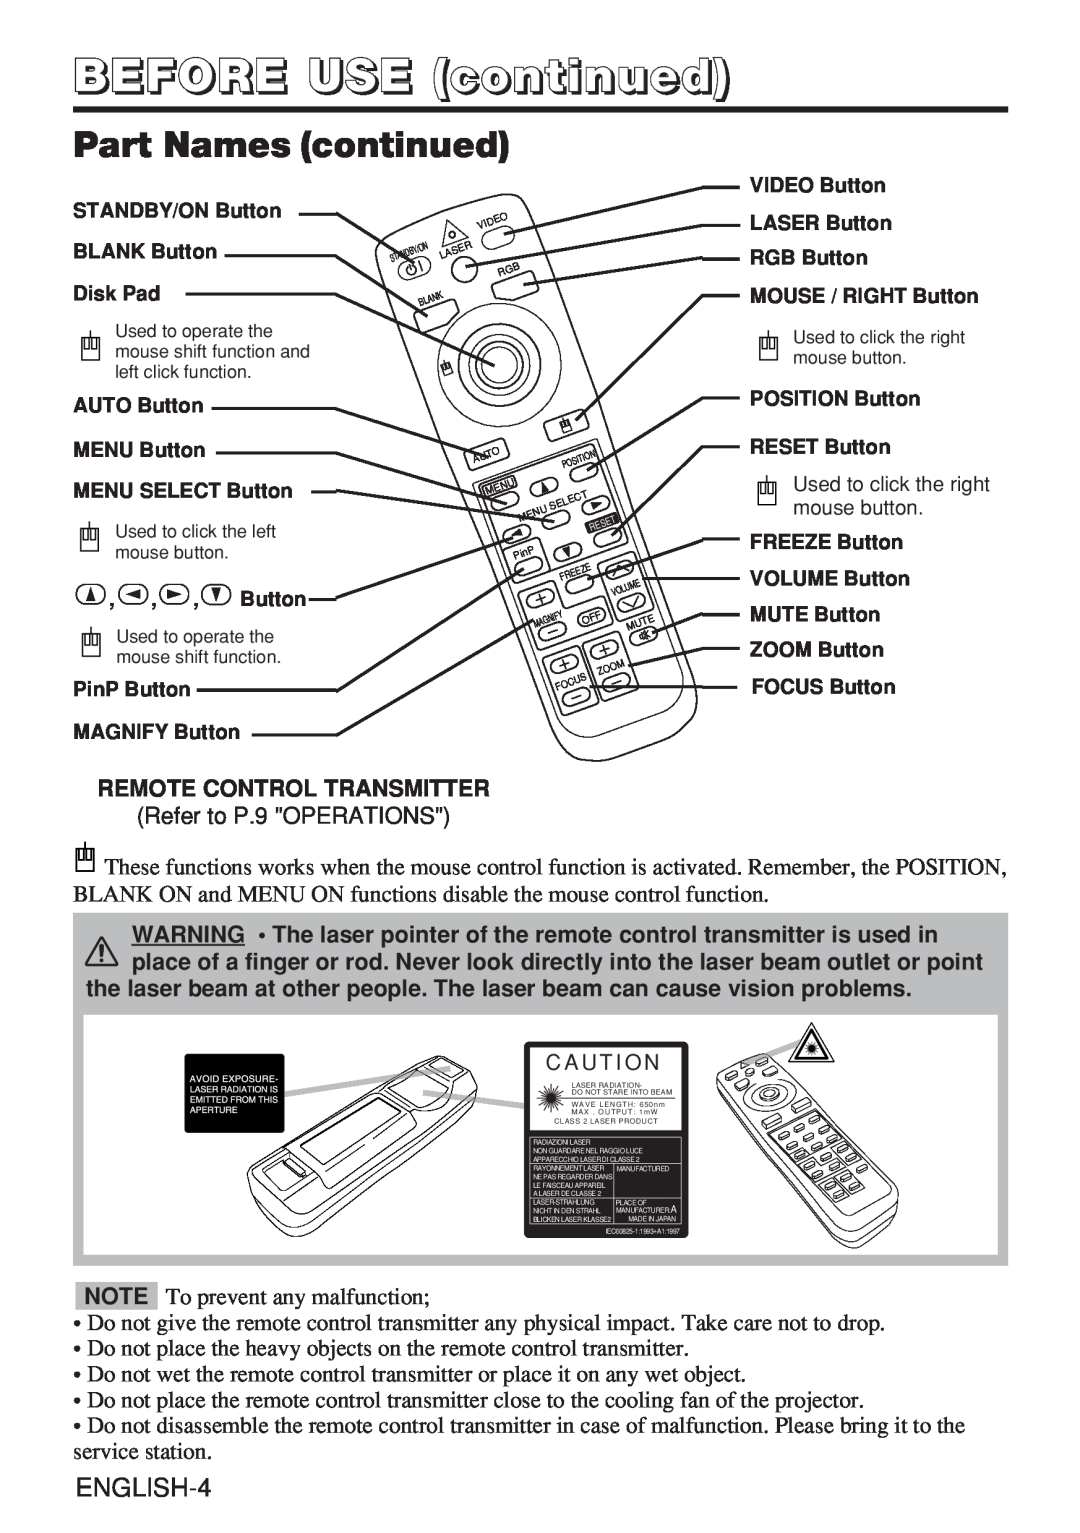 Hitachi CP-X985W user manual Part Names continued, BEFORE USE continued, ENGLISH-4 